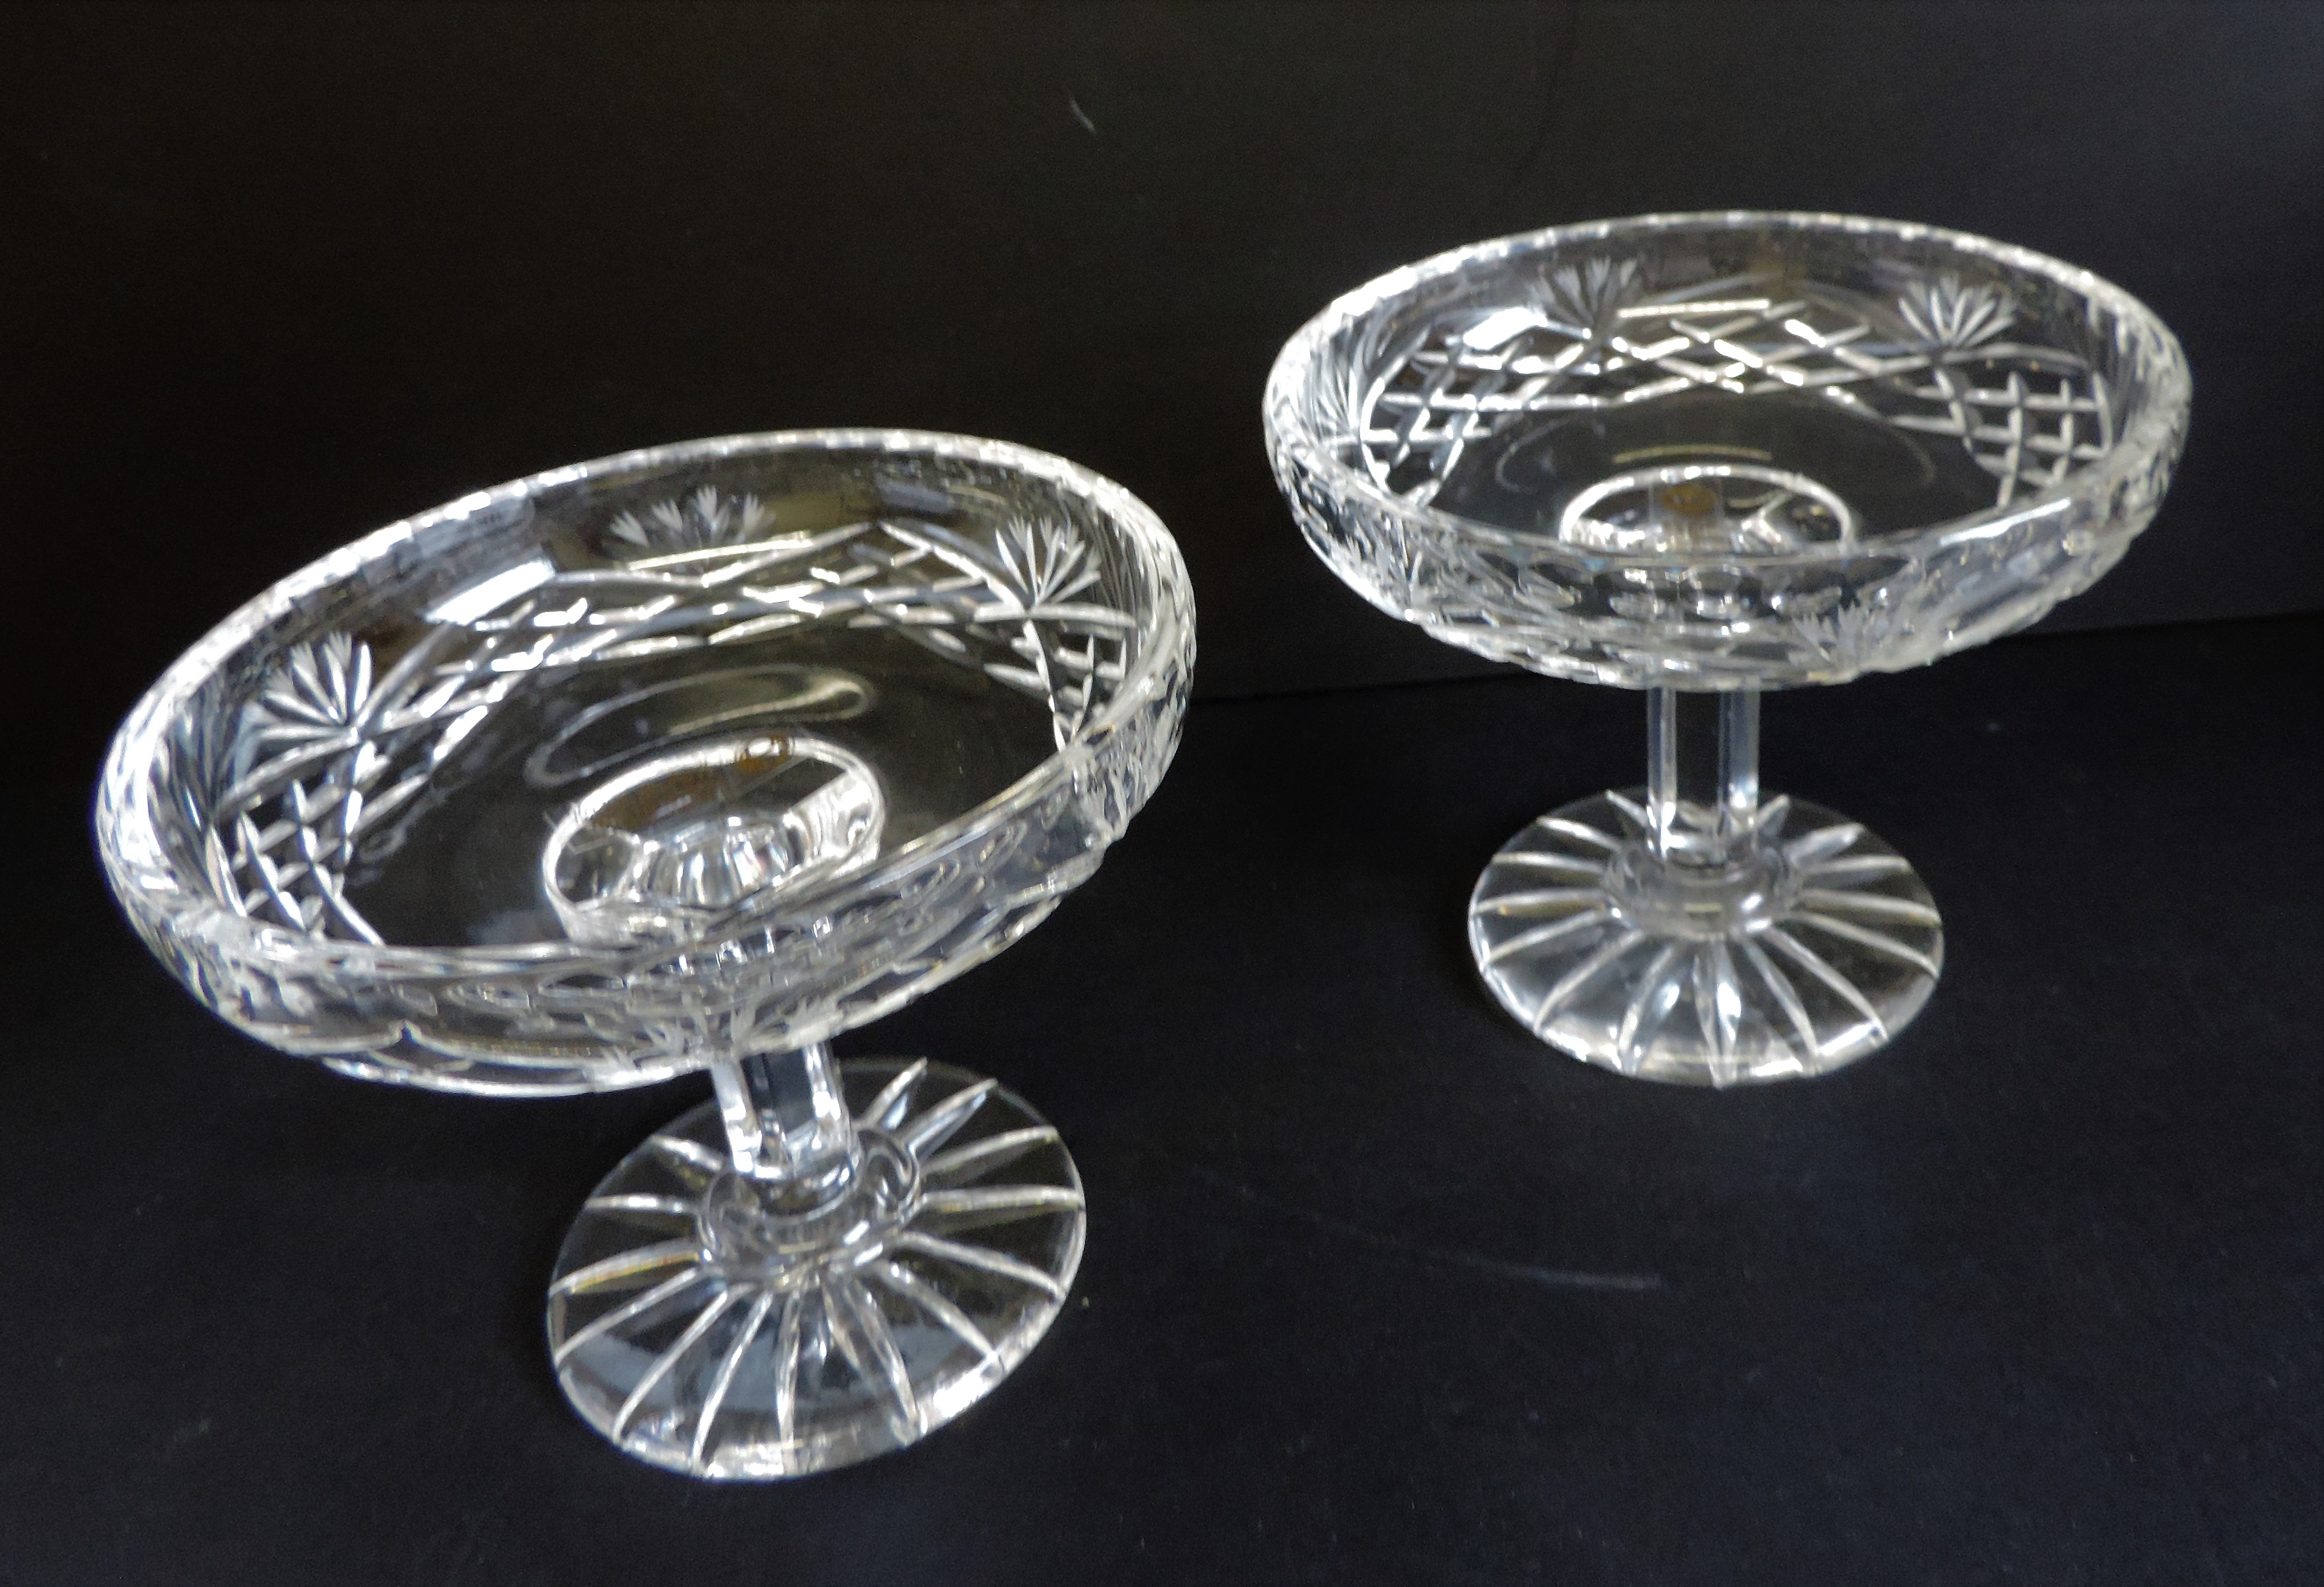 Pair of Hand Cut Crystal Dishes by Zawercie of Poland - Image 2 of 5